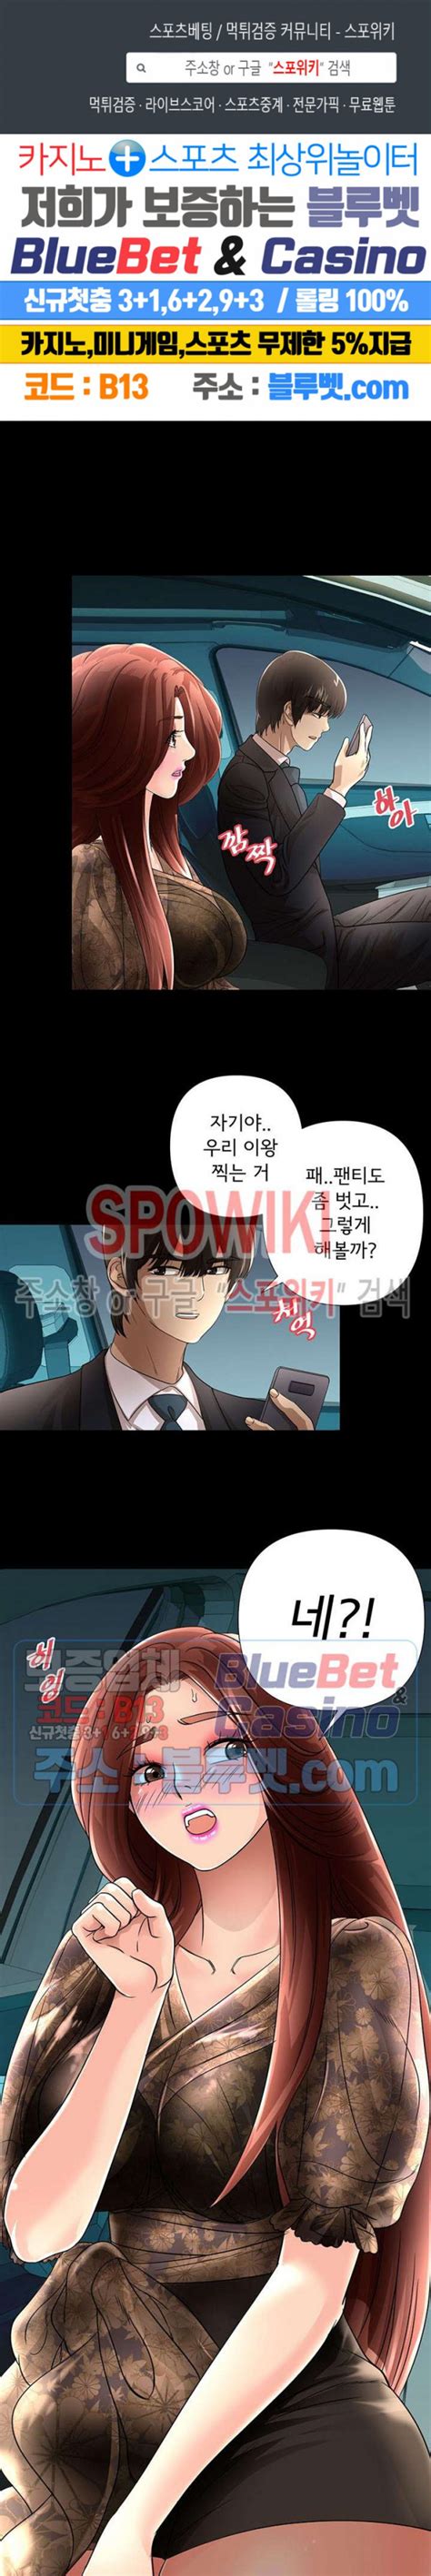 Secret class english chapter 88 38 mins ago. Mother and child - Chapter 16 - MANYTOON - MANHWA 18 RAW